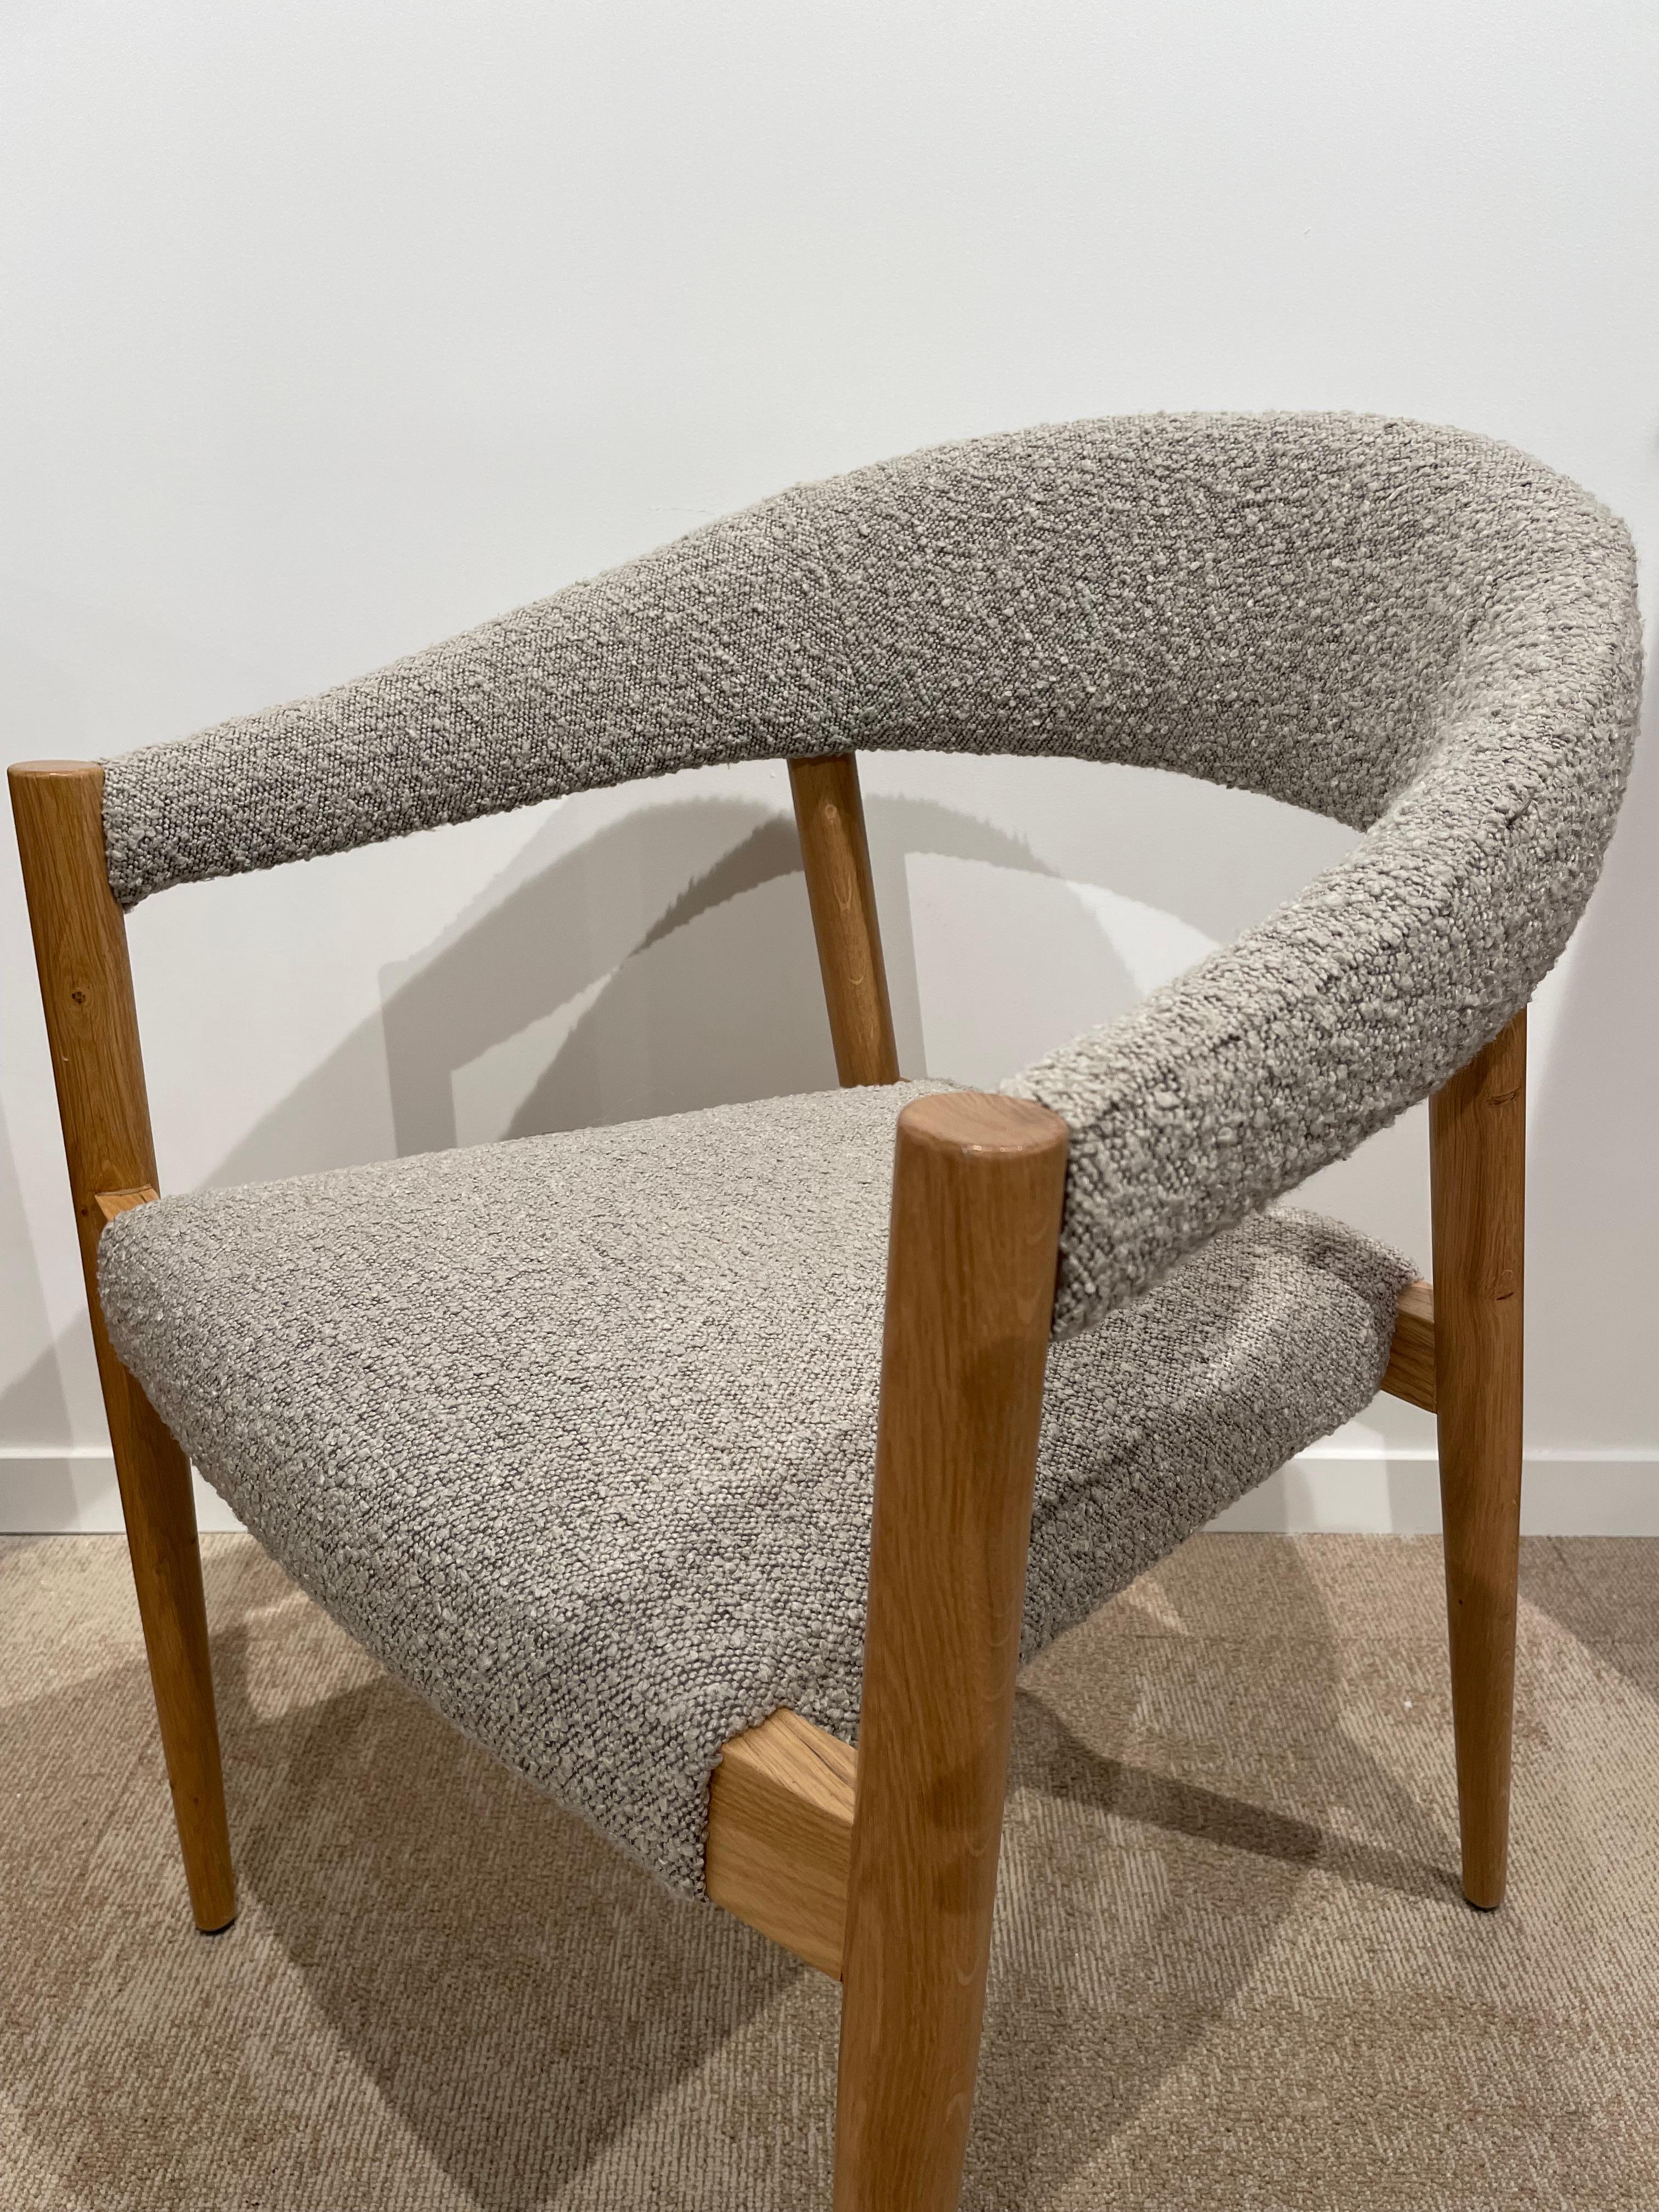 1960s Danish Design and Scandinavian Style Wooden and Bouclé Fabric Chair For Sale 4